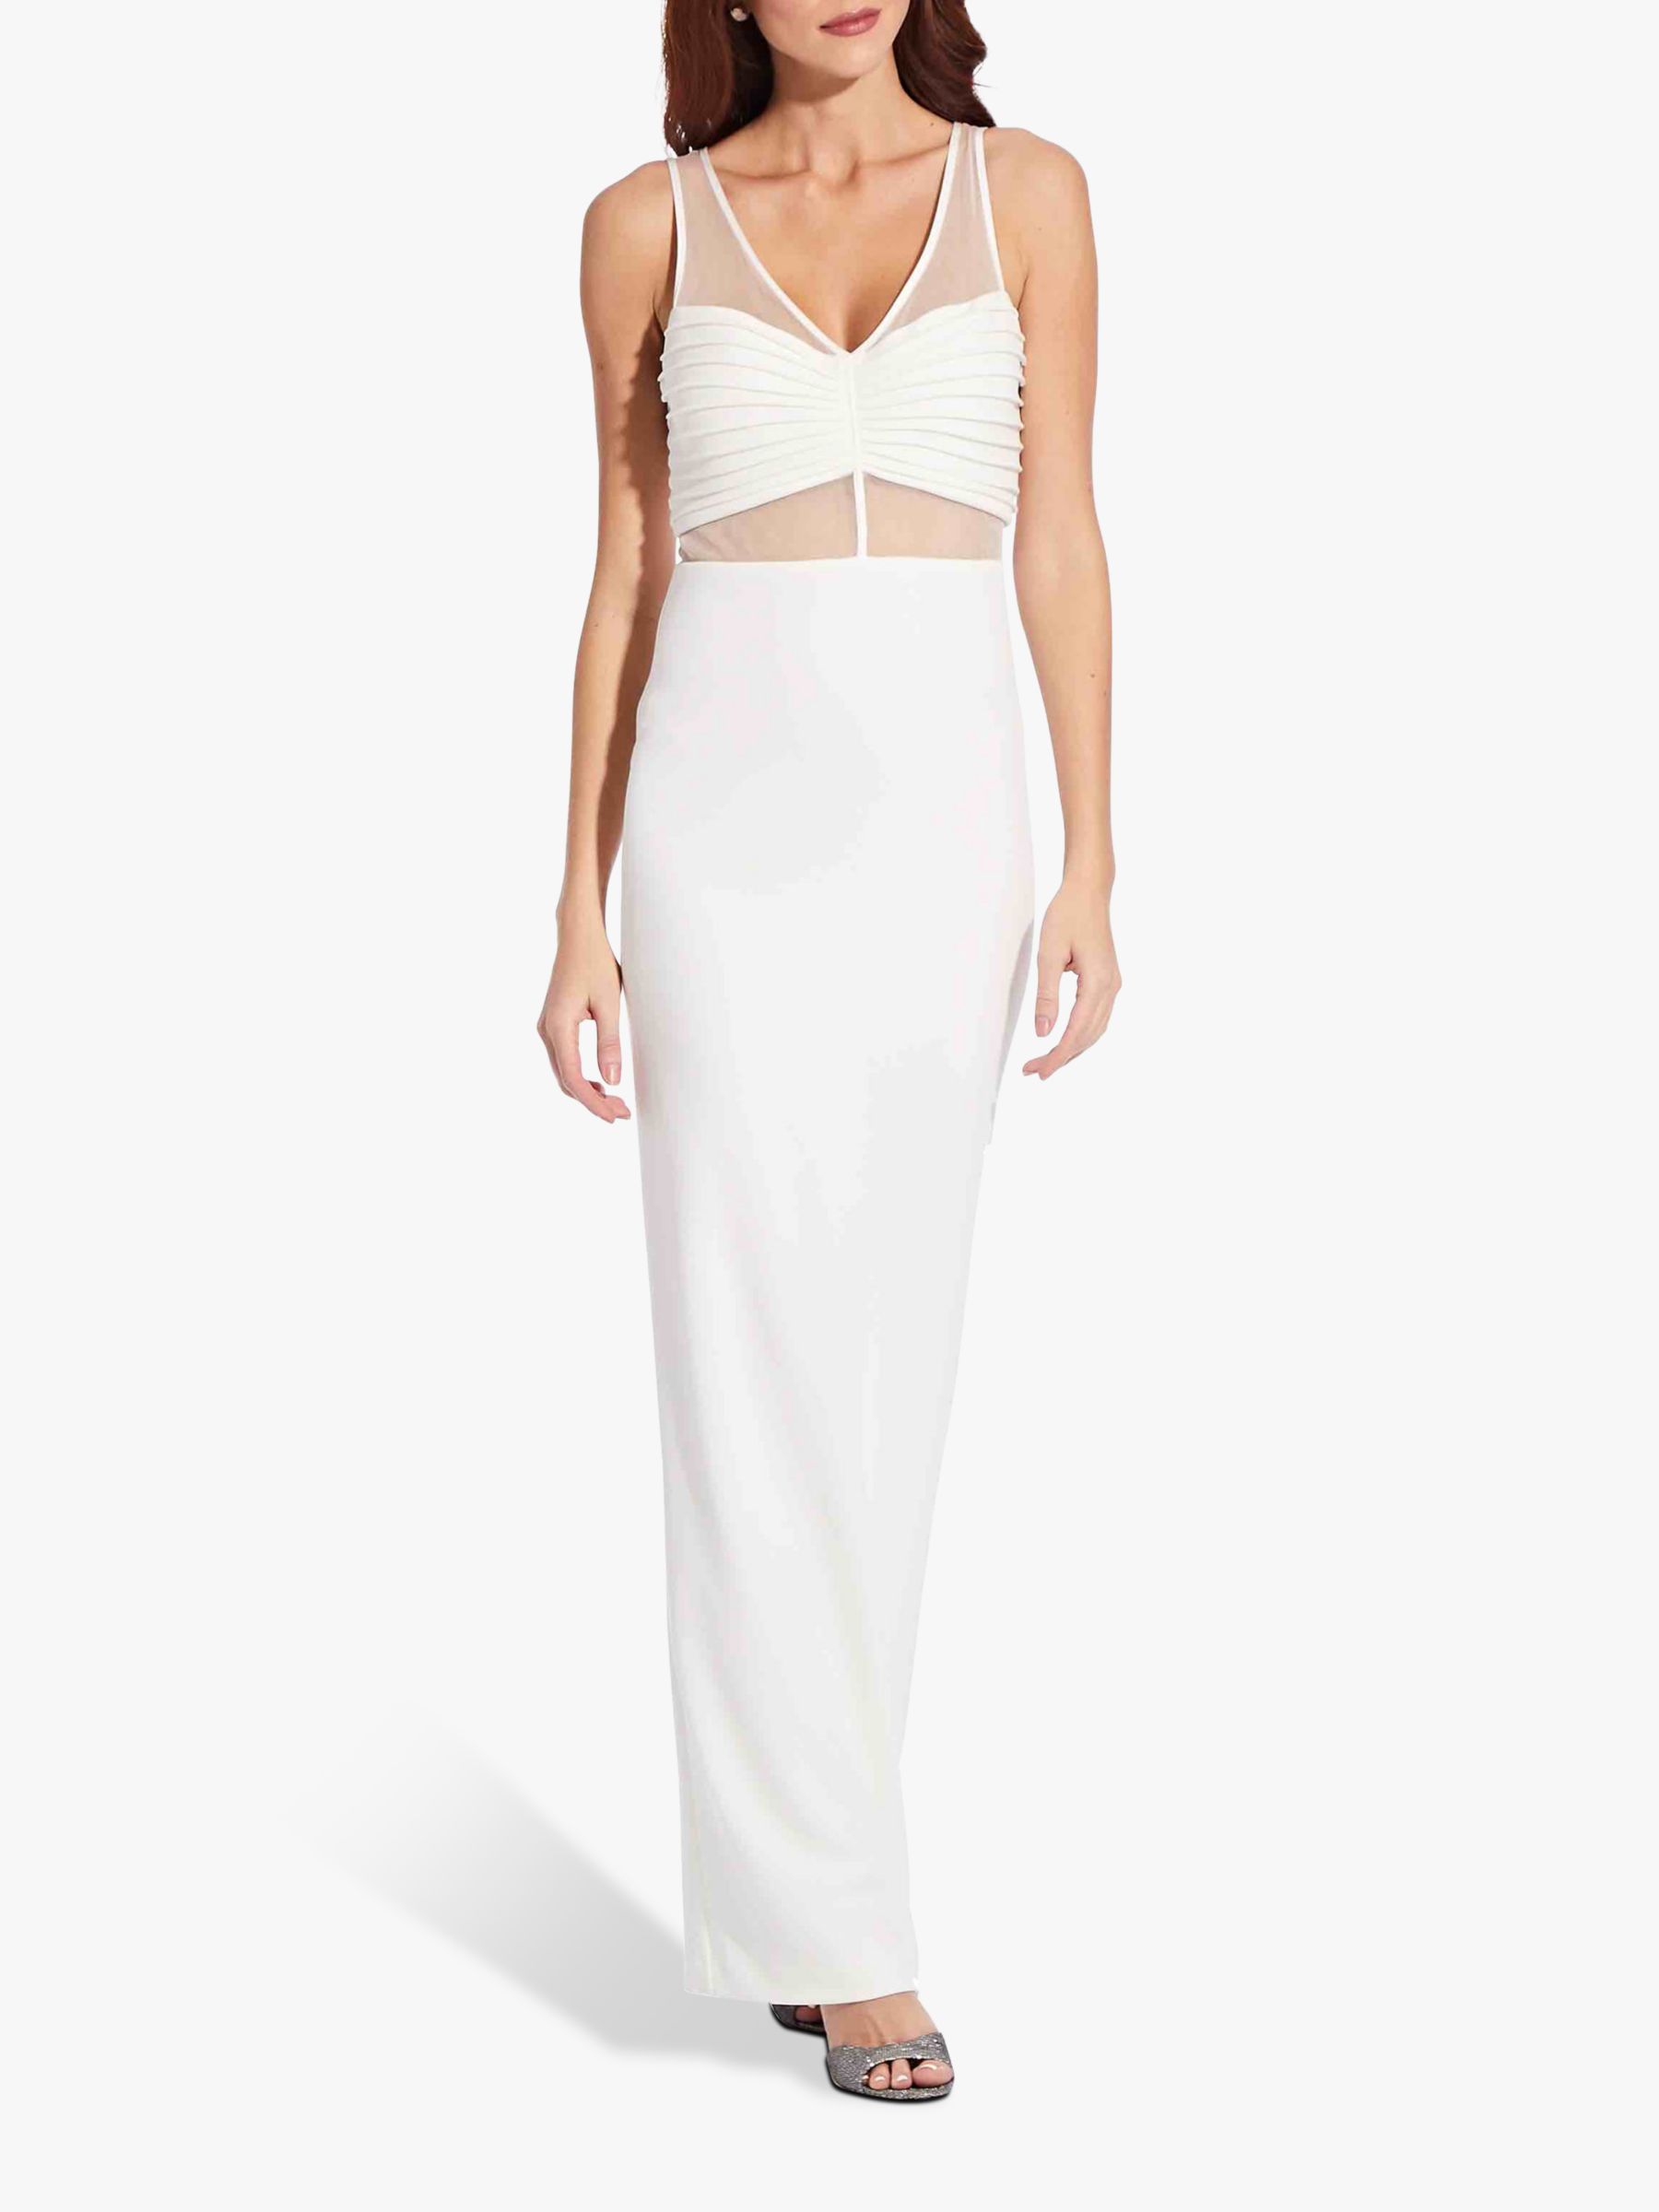 Adrianna Papell Illusion Crepe Dress, Ivory at John Lewis & Partners